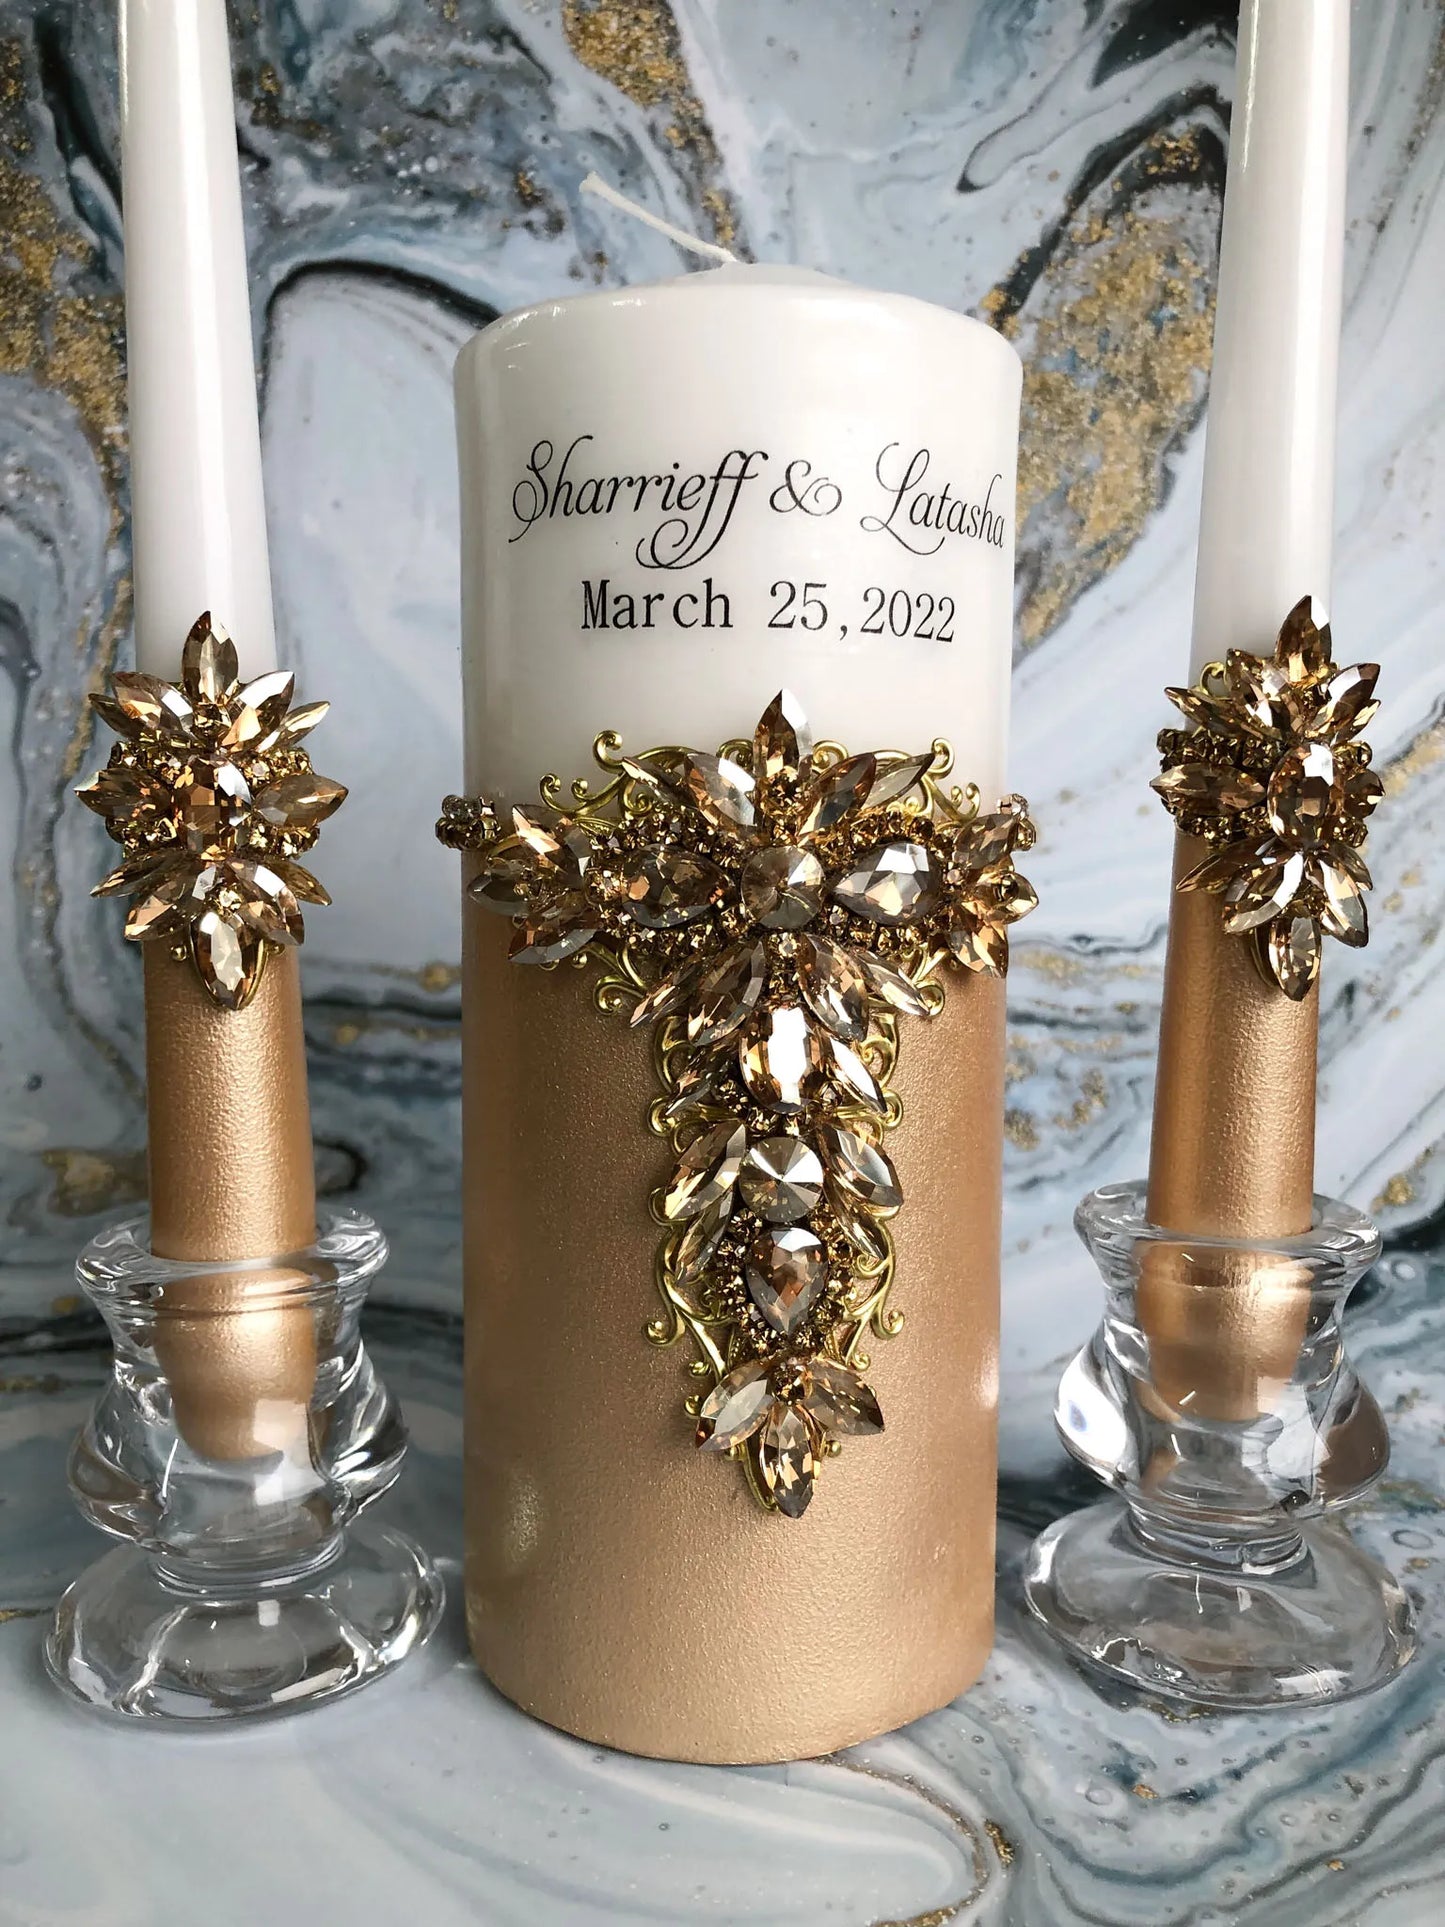 Personalized Unity Candles Set with Names and Date - Gloria Collection